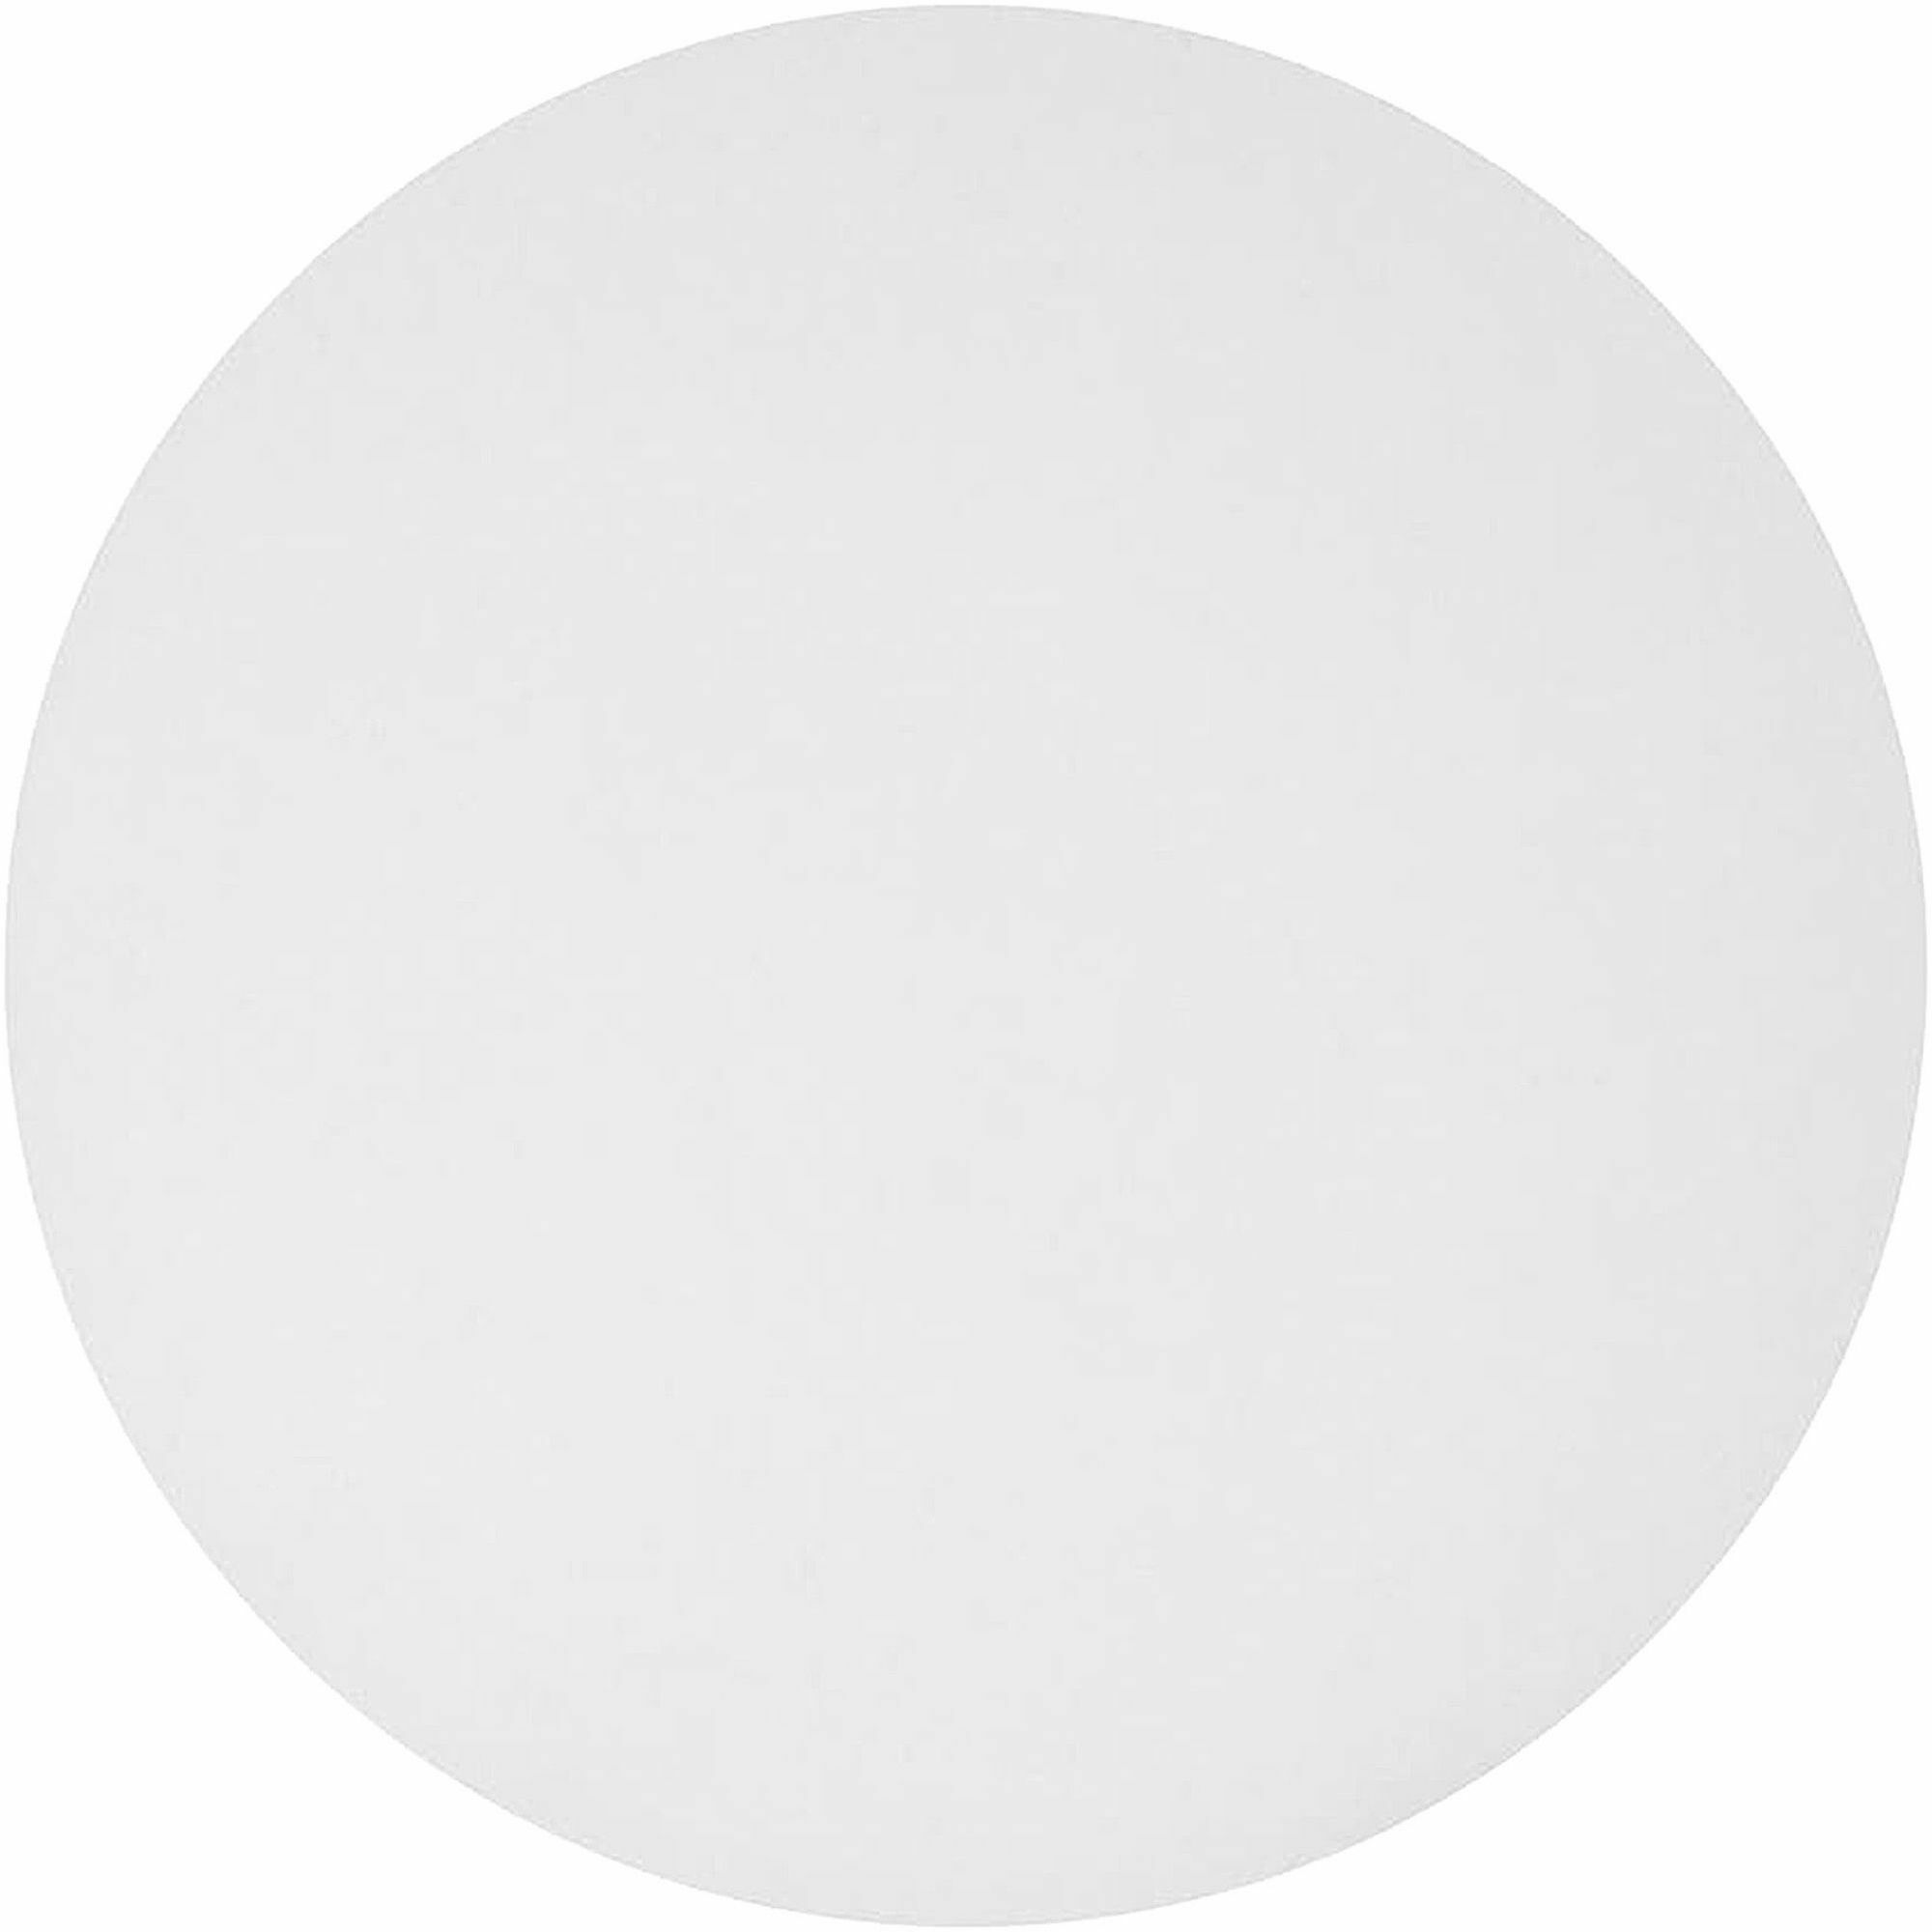 blutable-9-round-foil-pan-flat-board-lids-round-500-carton-white-silver_rmlfoillid9 - 2